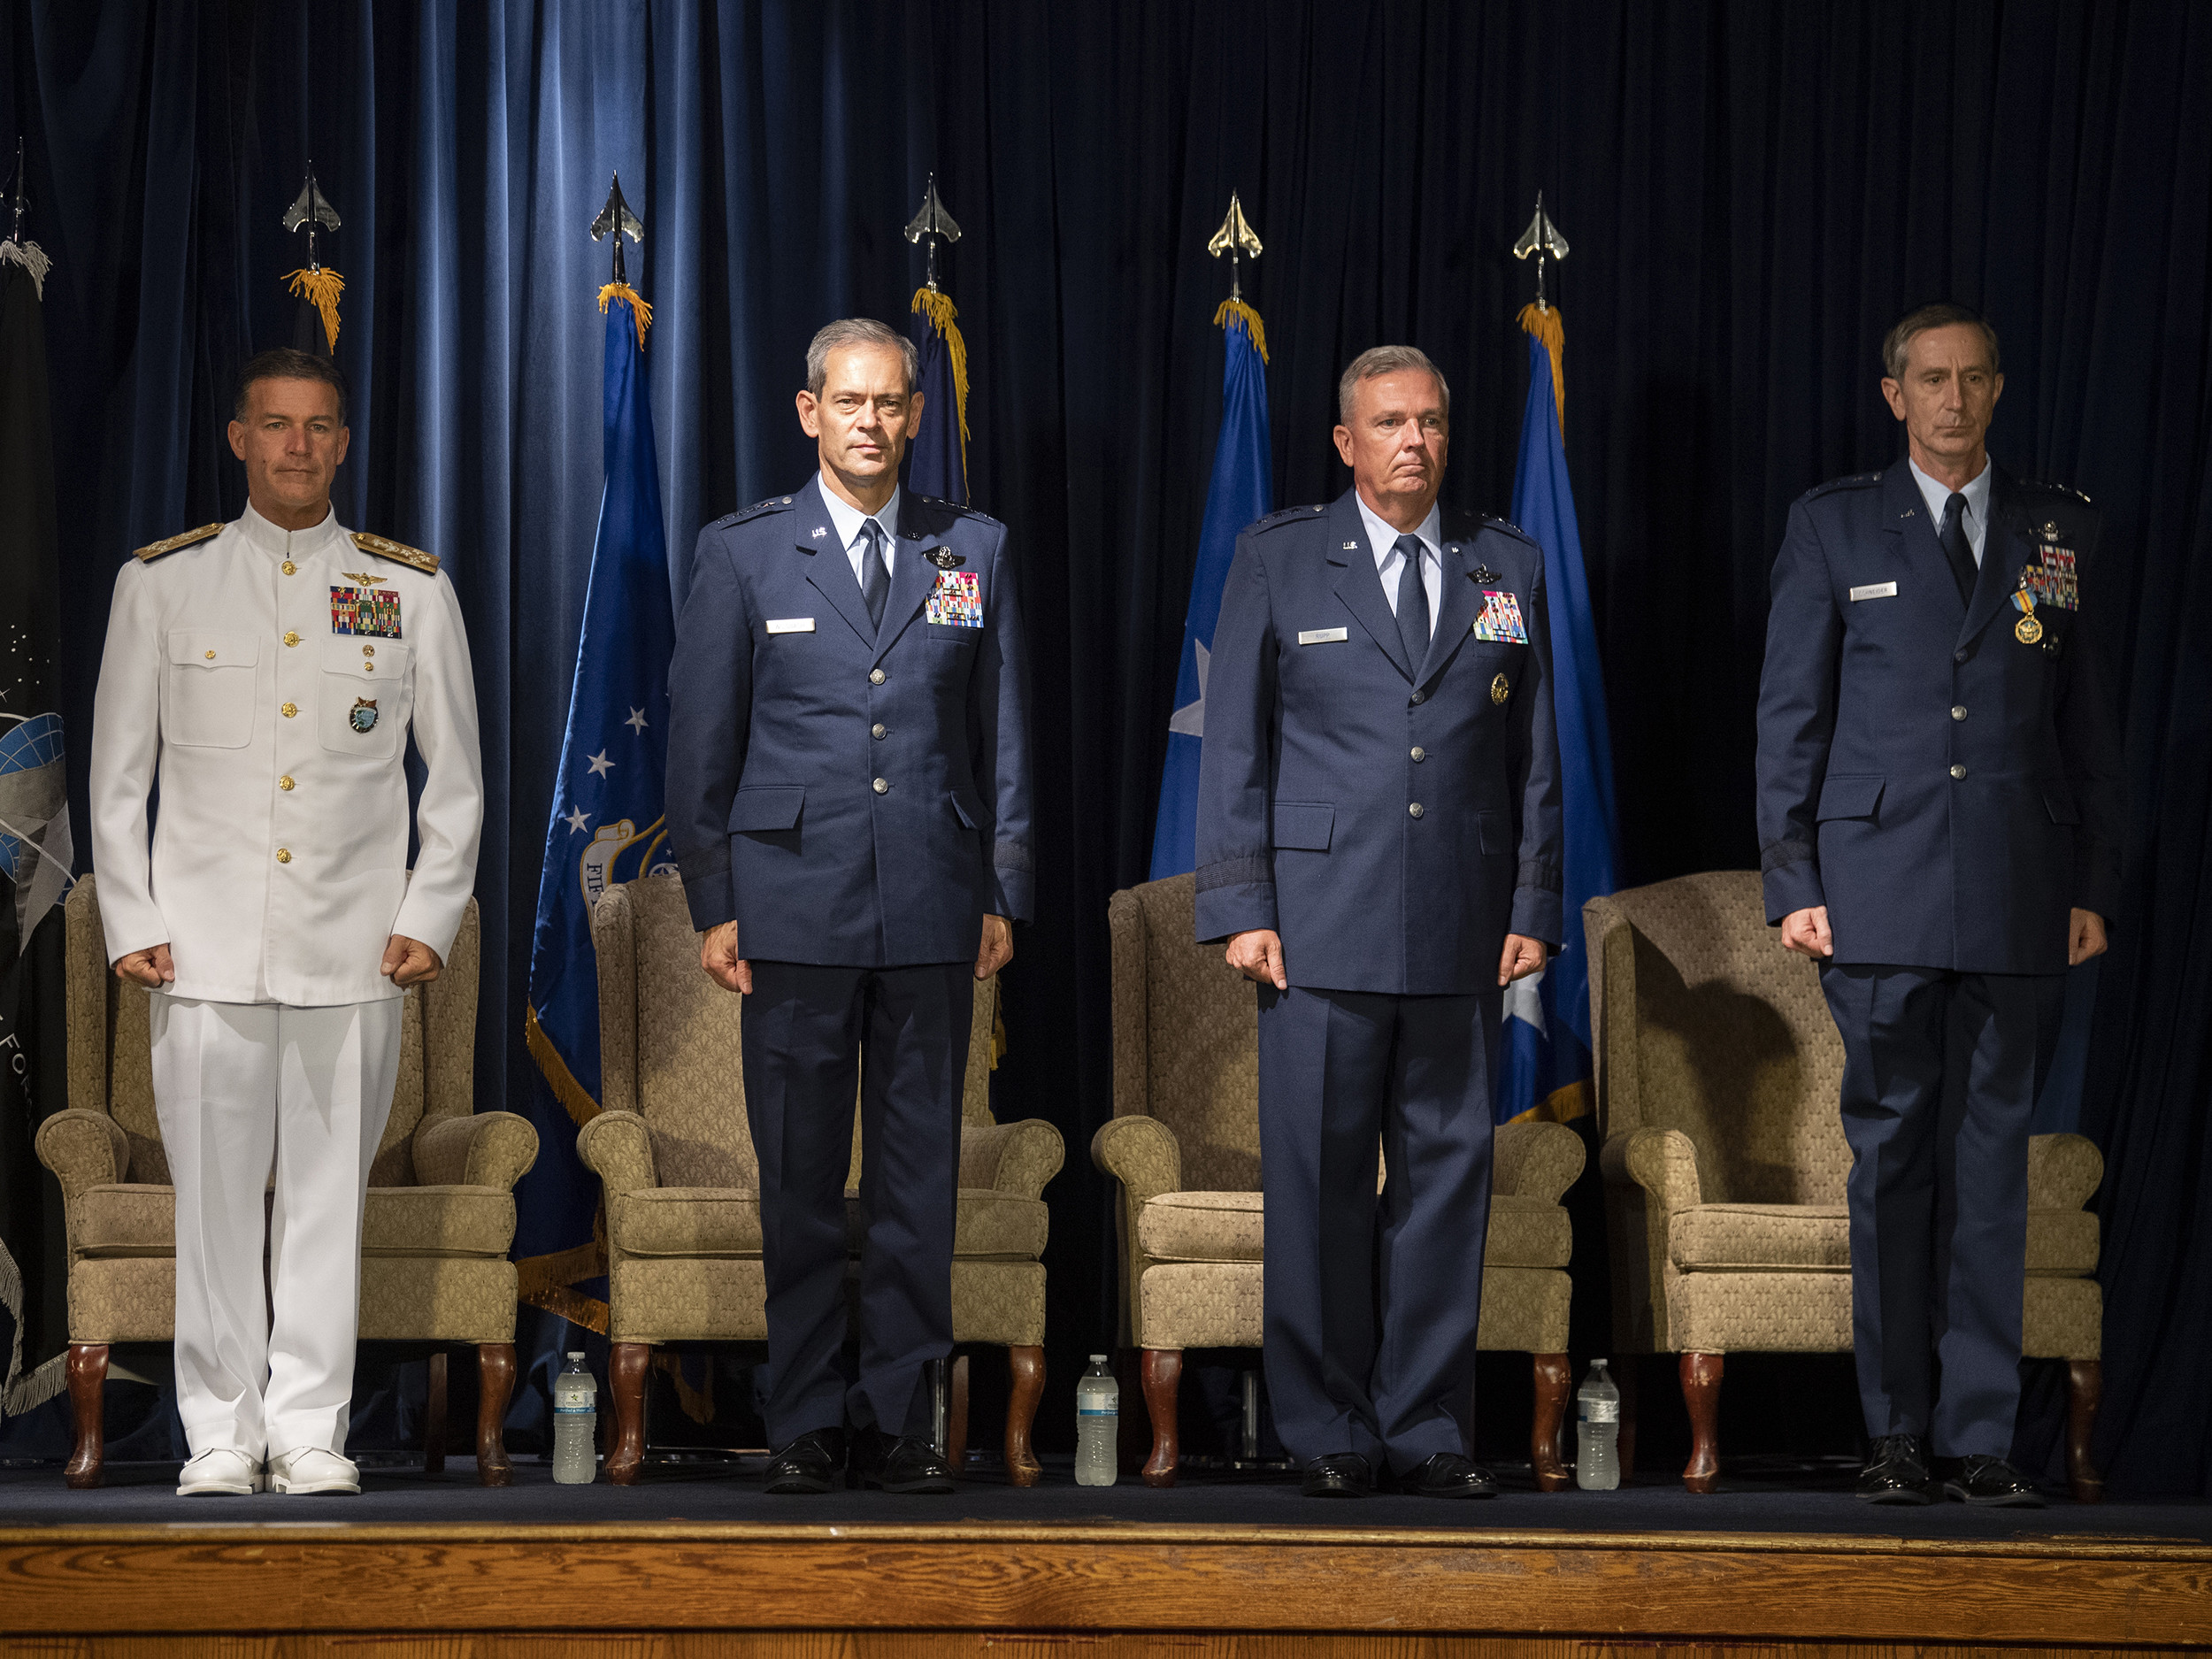 Lt. Gen. Rupp Takes Command of U.S. Military in Japan